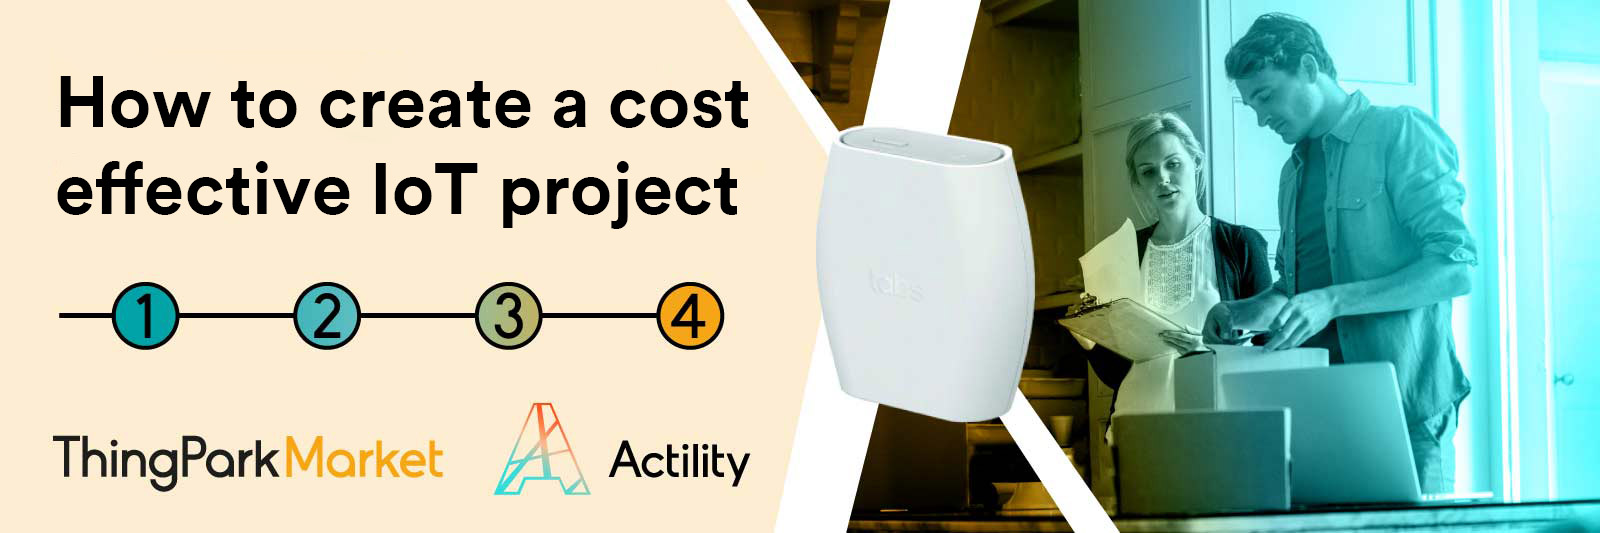 How to create the most cost effective IoT project  